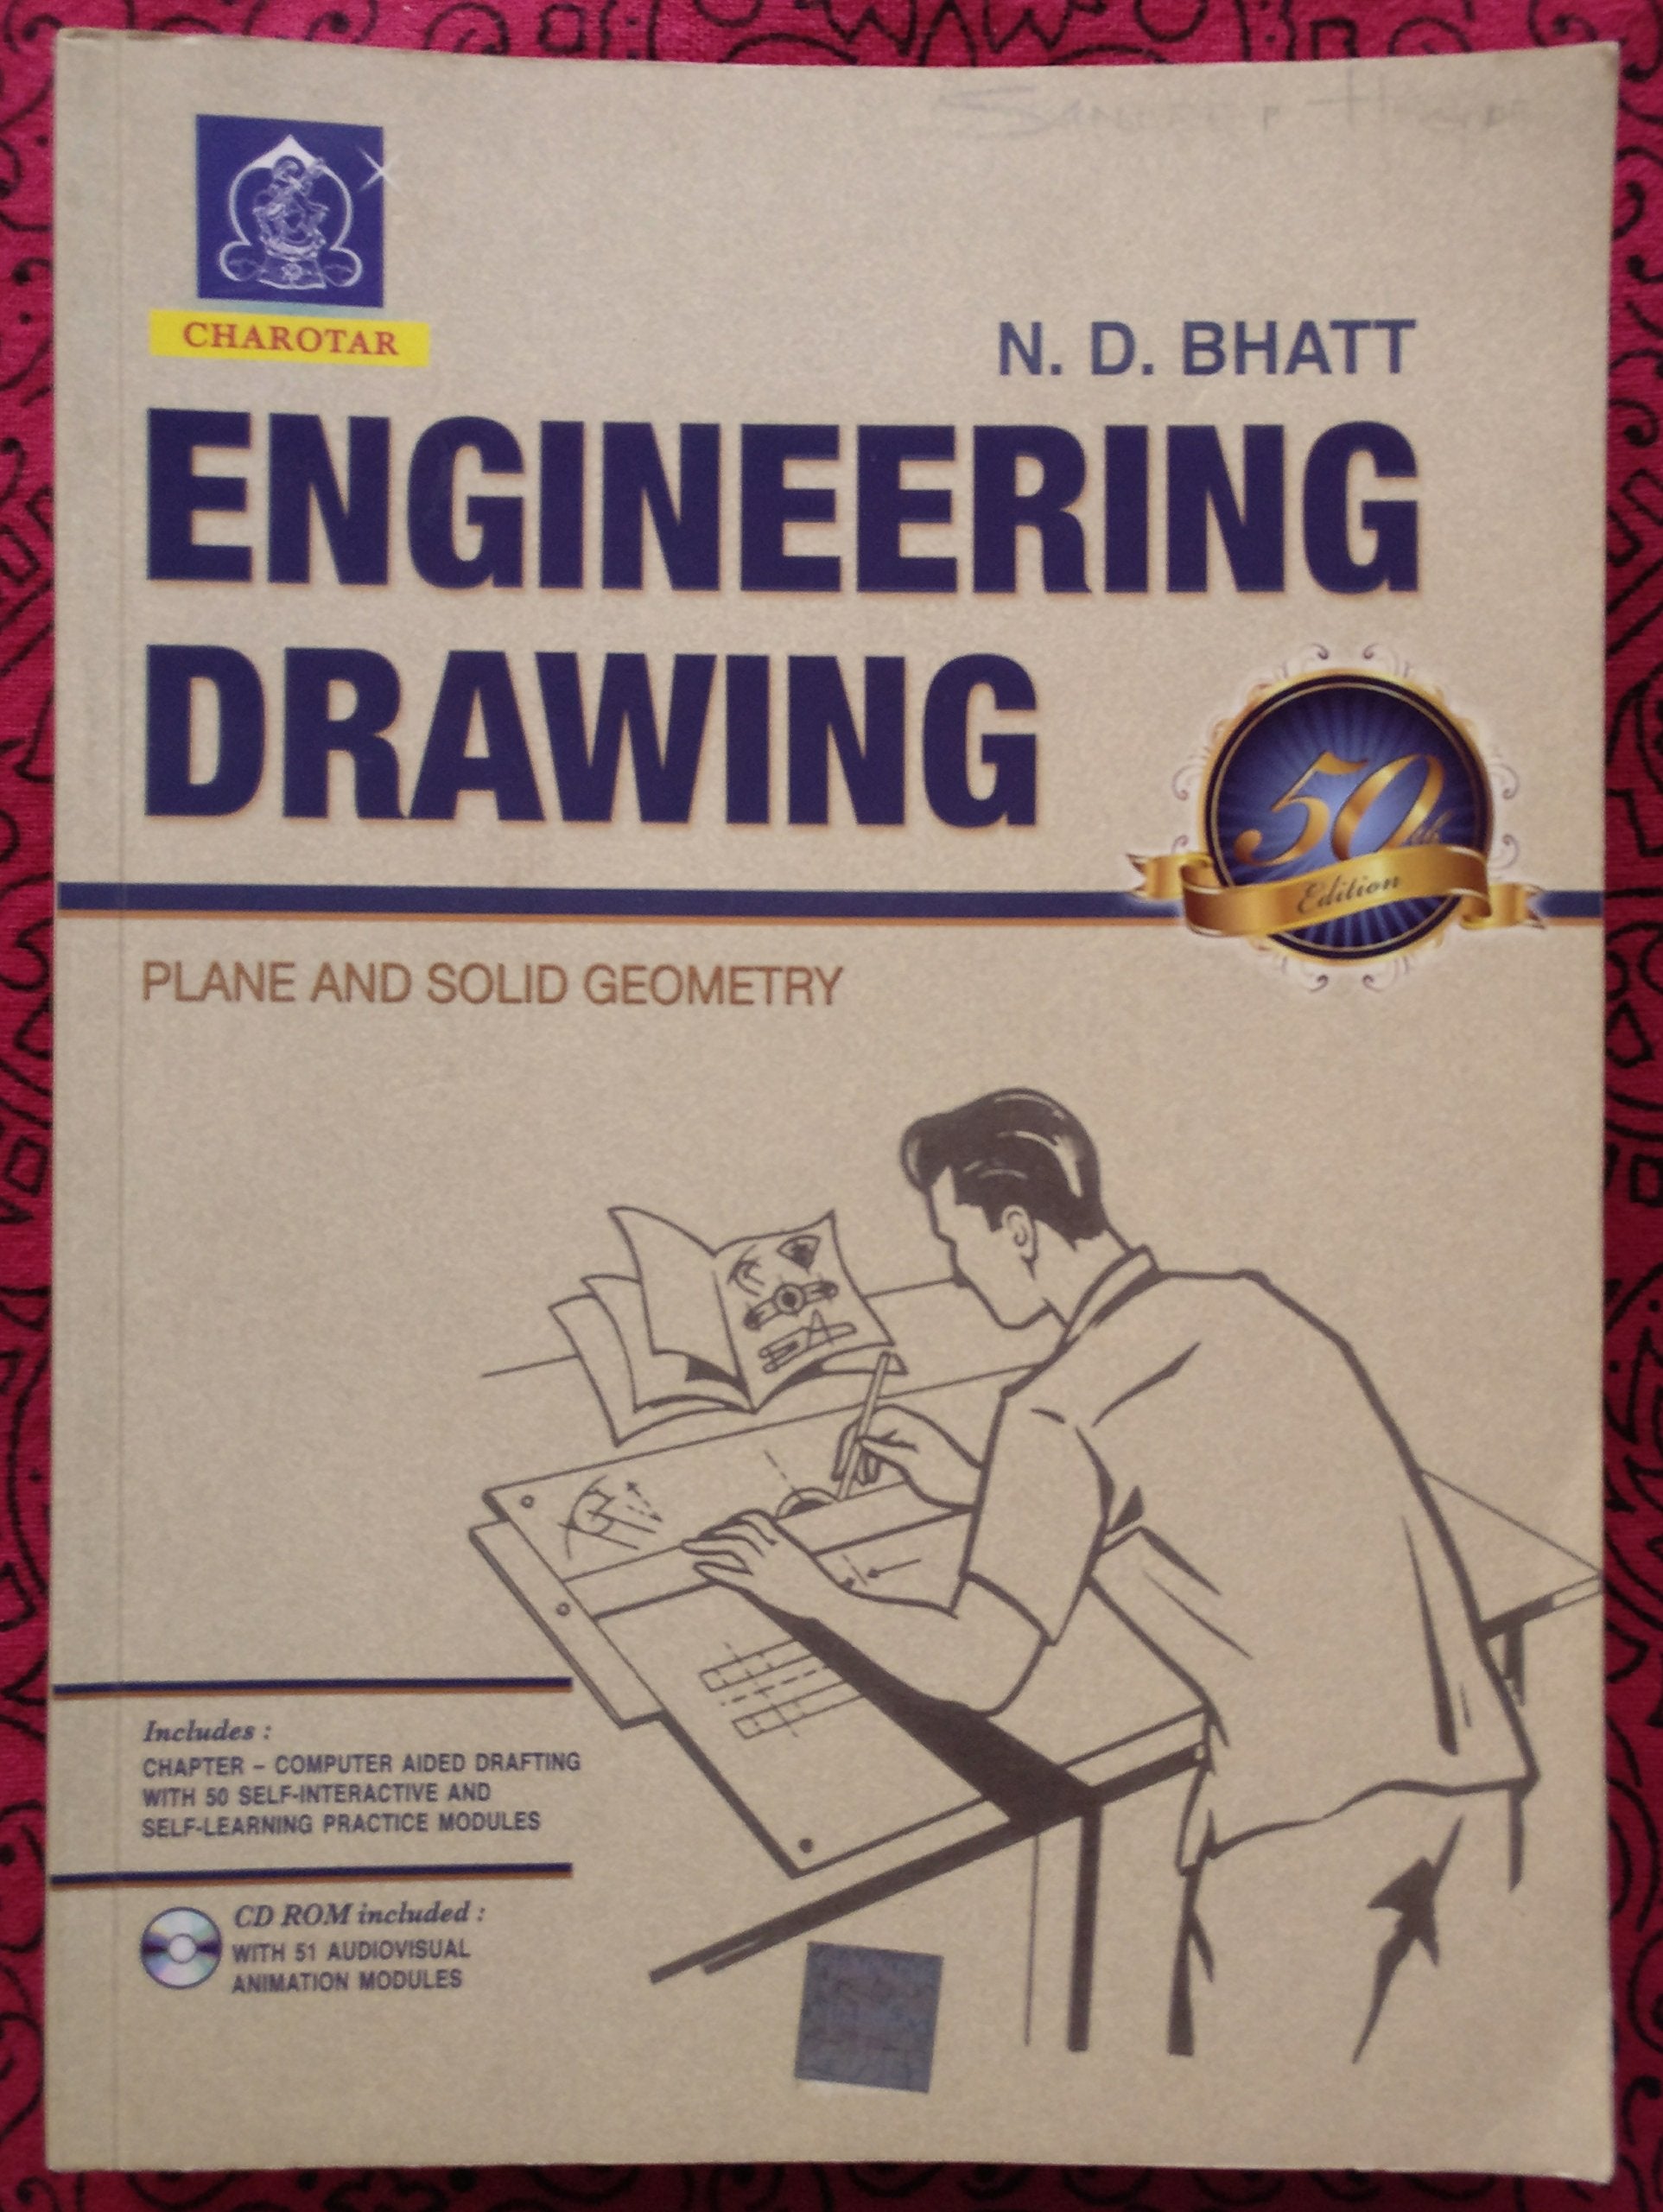 How to make an engineering drawing sheet - Quora